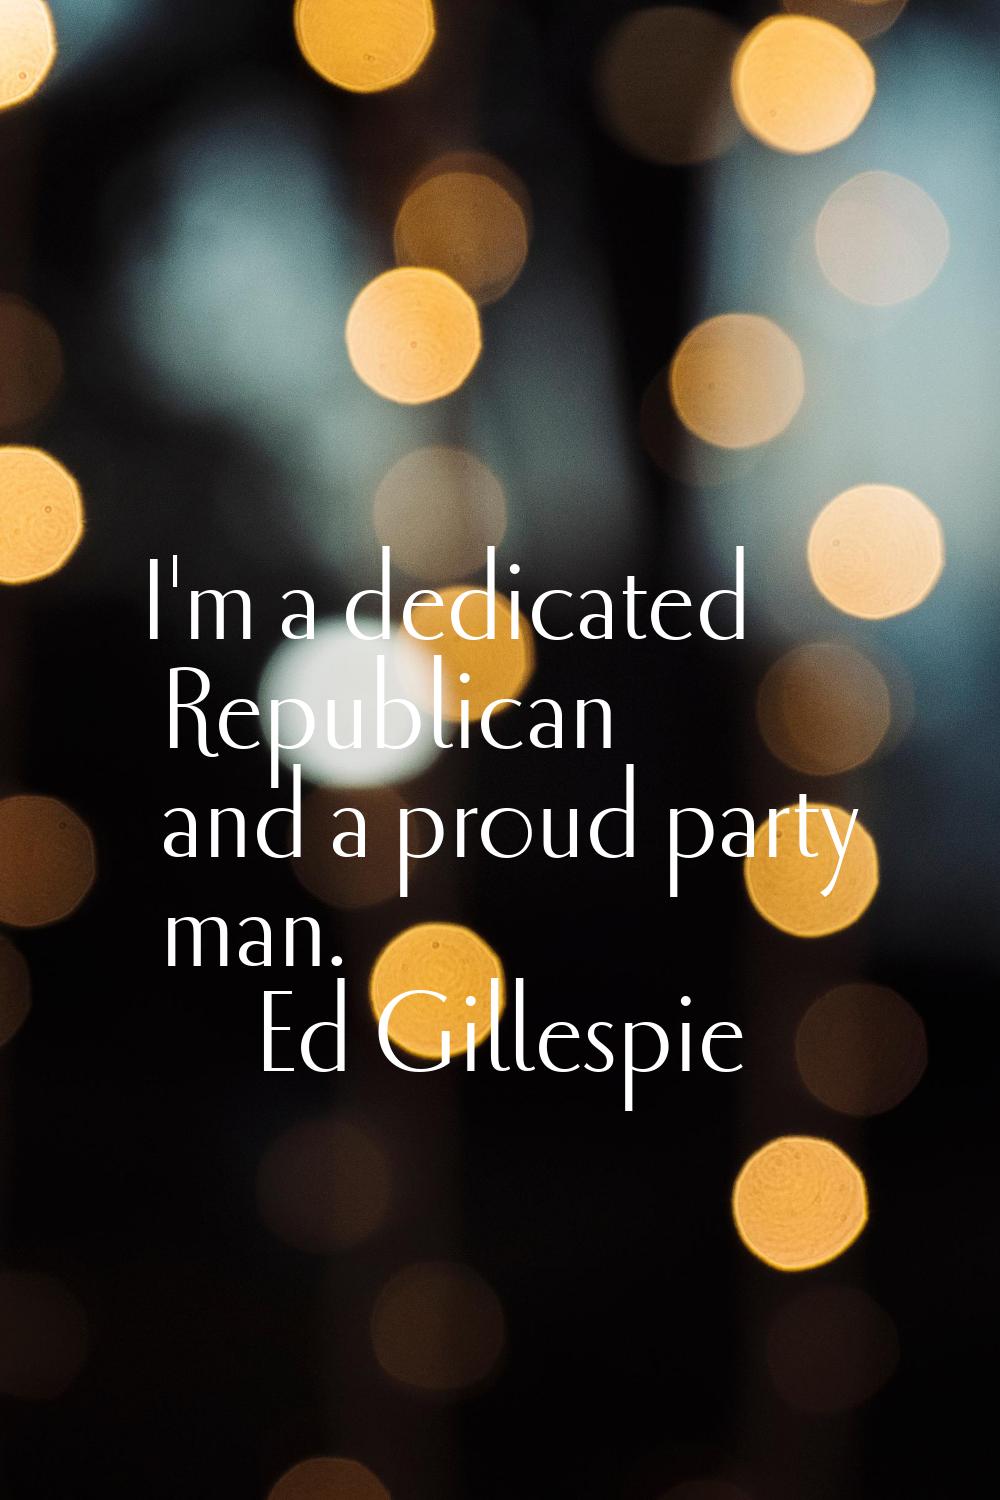 I'm a dedicated Republican and a proud party man.